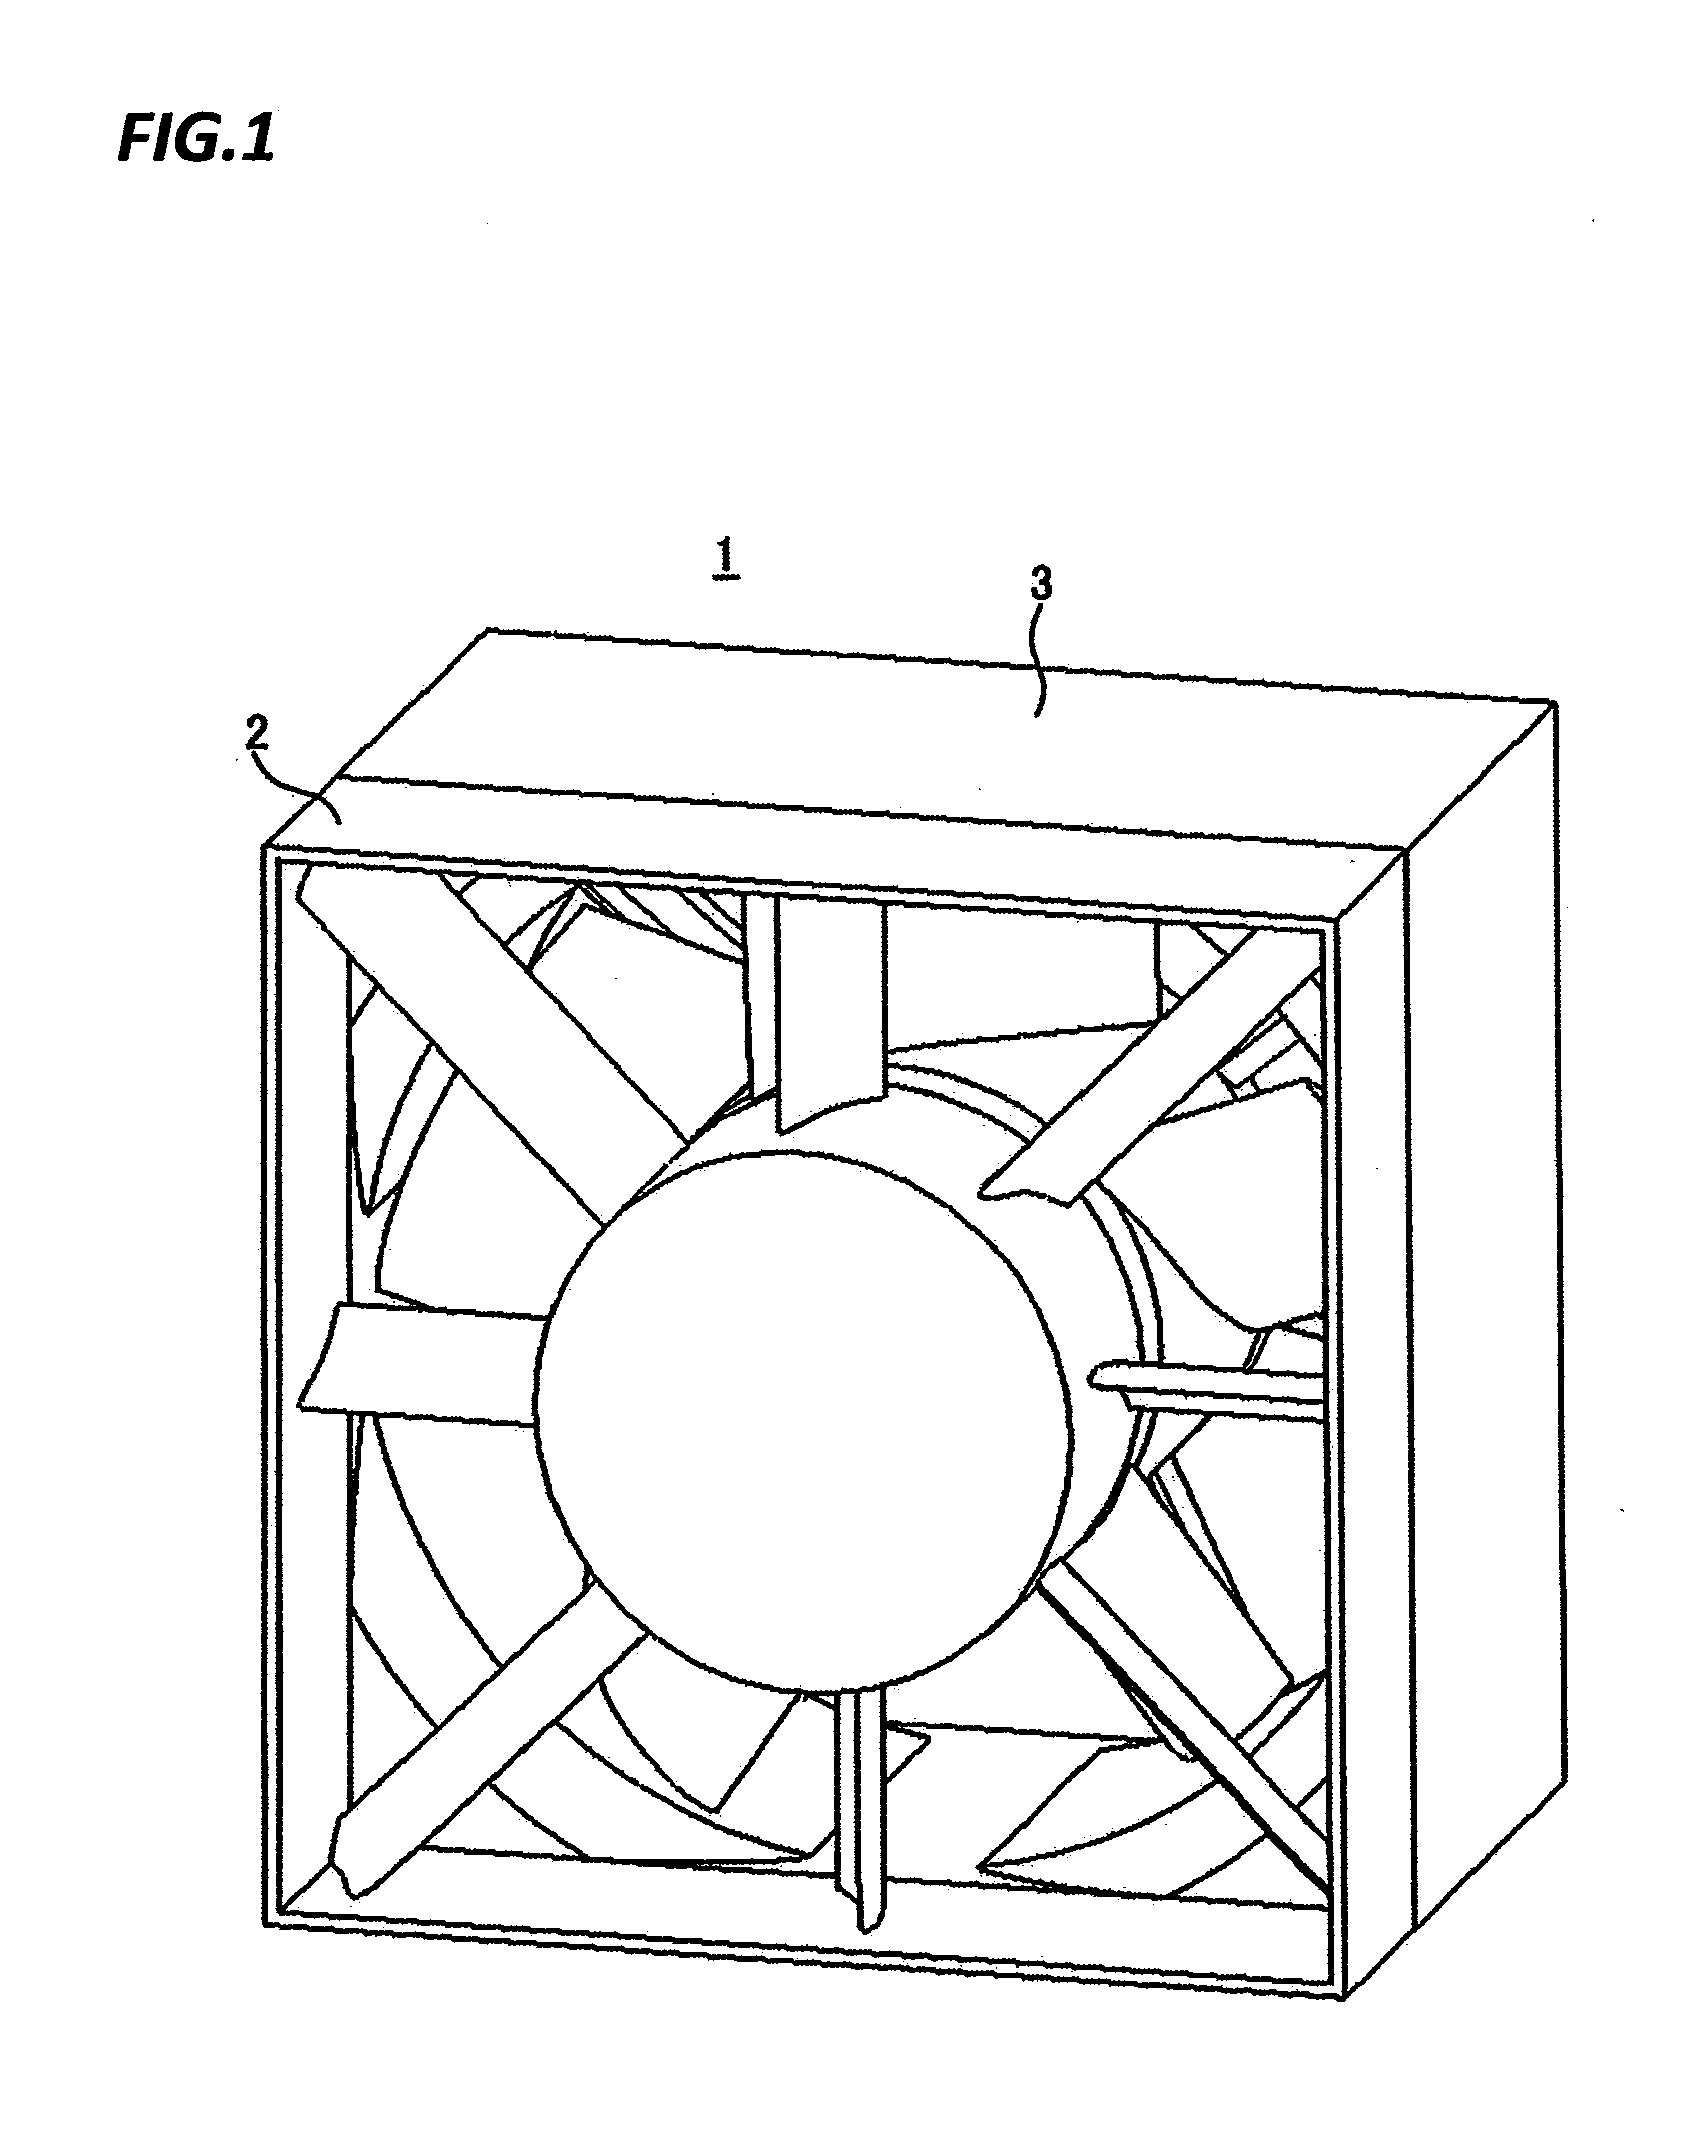 Fan modules and server equipment